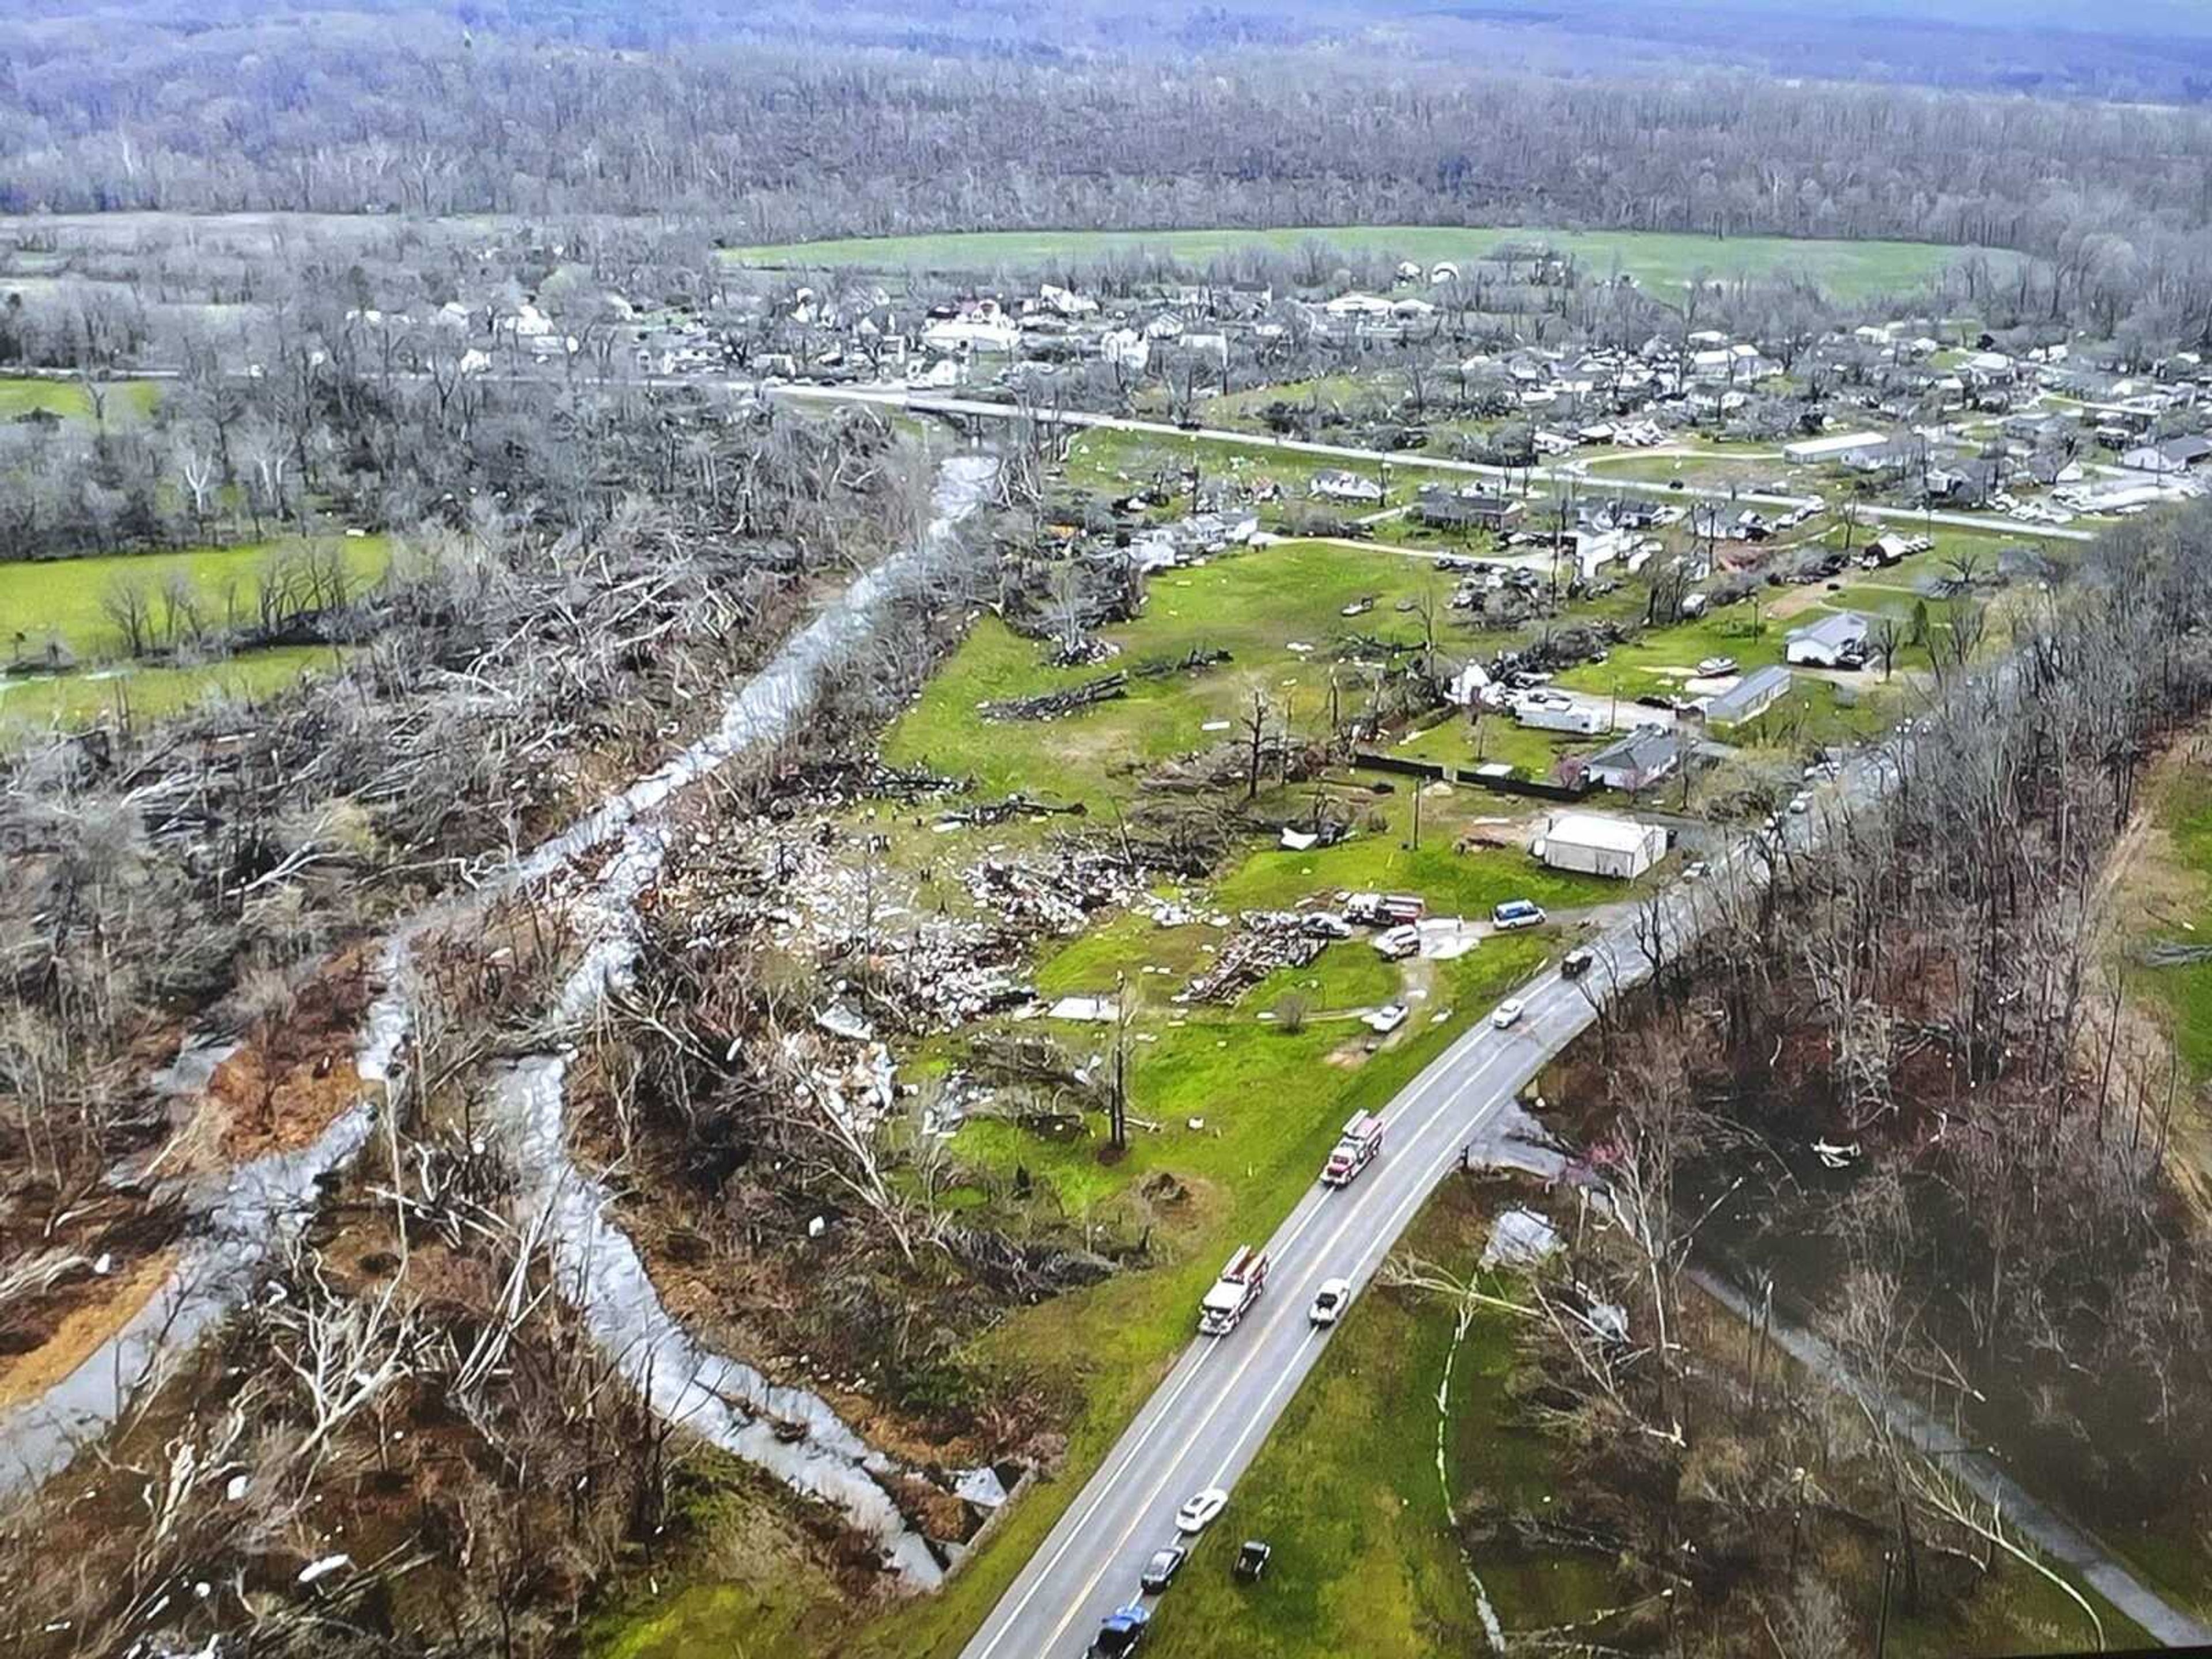 An overview shot of the effects of the tornado taken west of Marble Hill, Missouri on April 5. Photo from Missouri State Highway Patrol.